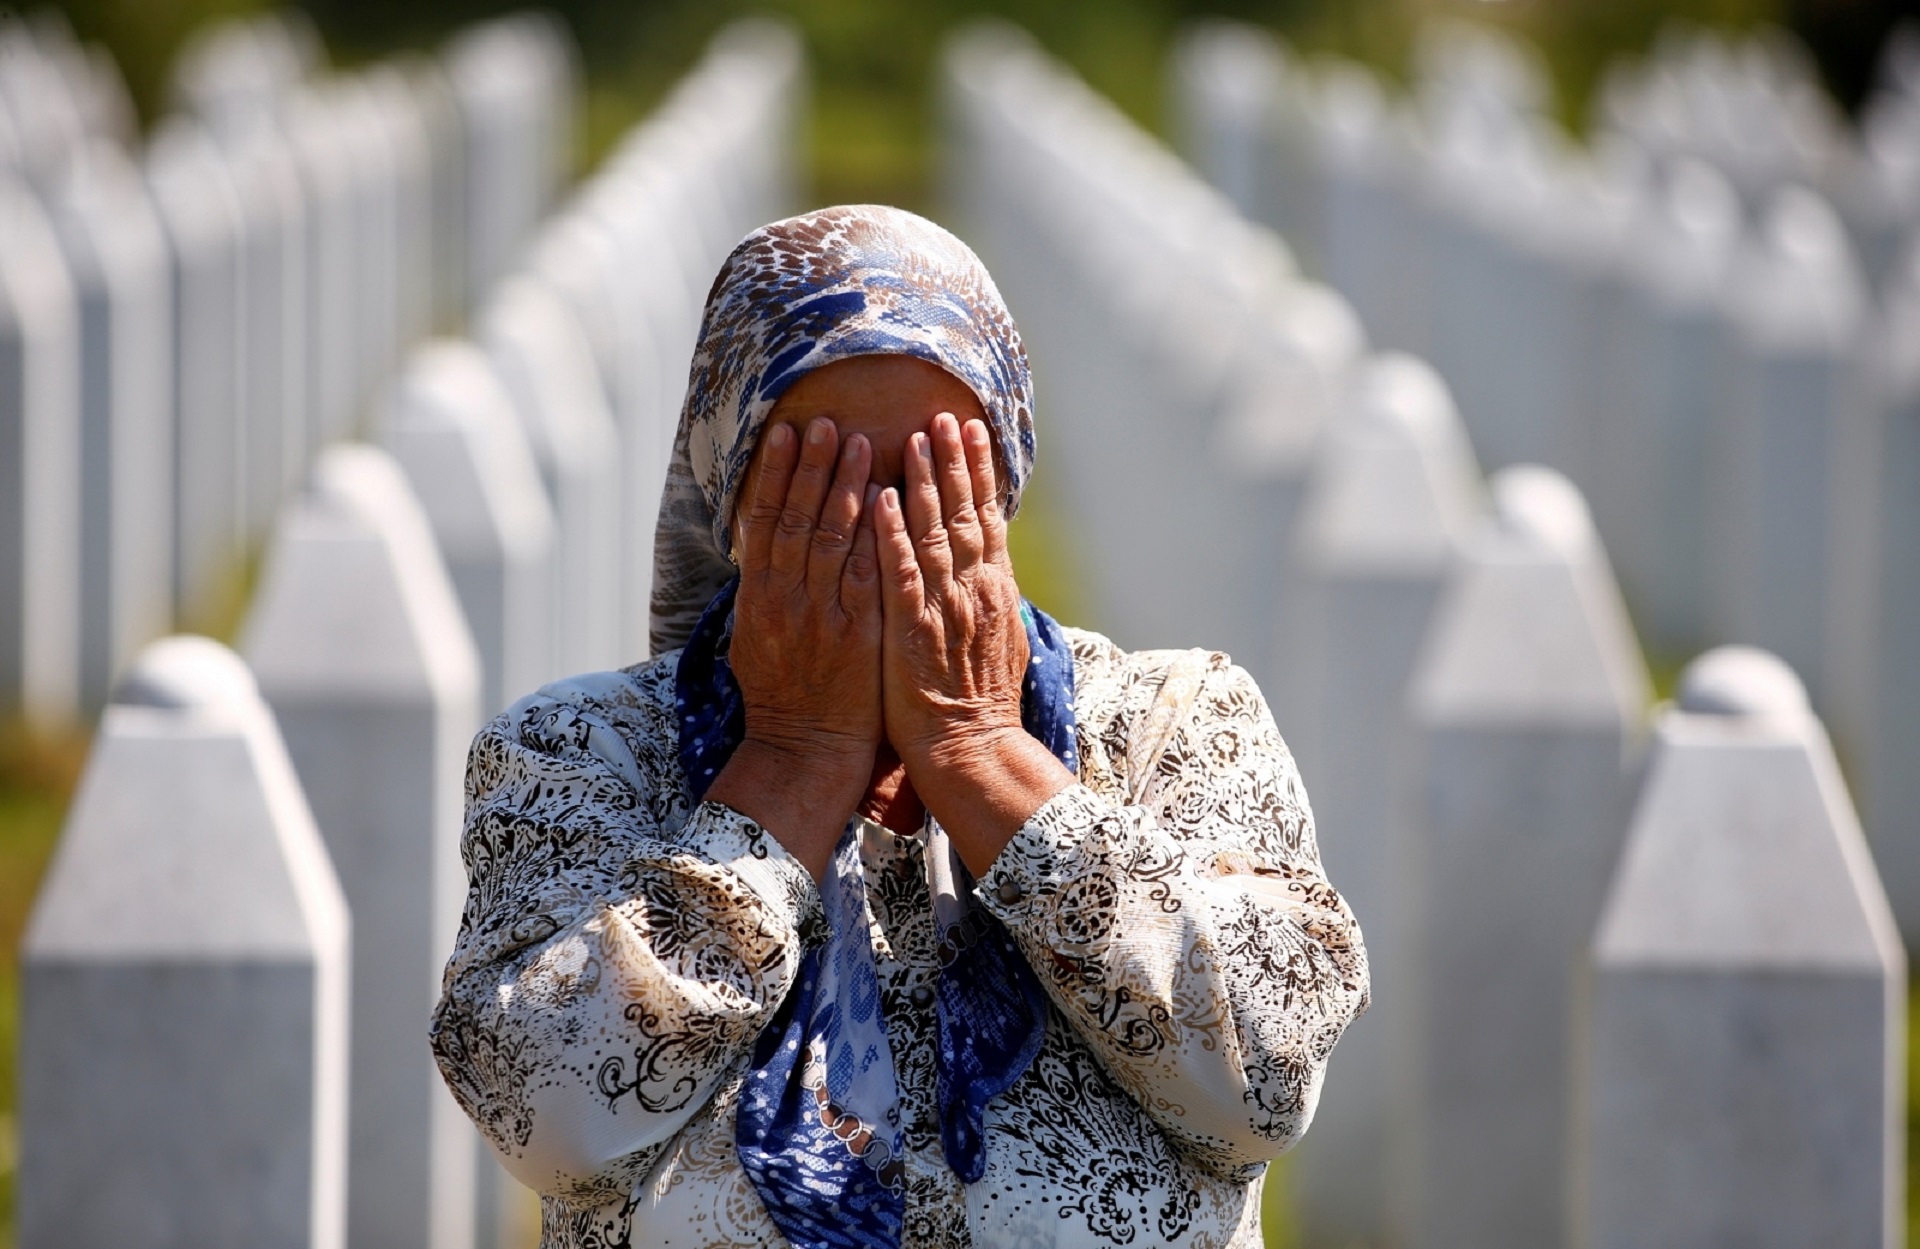 Bosnia and Herzegovina commemorates 25th anniversary of Srebrenica massacre, in Potocari A woman prays at a graveyard, ahead of a mass funeral in Potocari near Srebrenica, Bosnia and Herzegovina July 11, 2020. Bosnia marks the 25th anniversary of the massacre of more than 8,000 Bosnian Muslim men and boys, with many relatives unable to attend due to the coronavirus disease (COVID-19) outbreak. REUTERS/Dado Ruvic     TPX IMAGES OF THE DAY DADO RUVIC